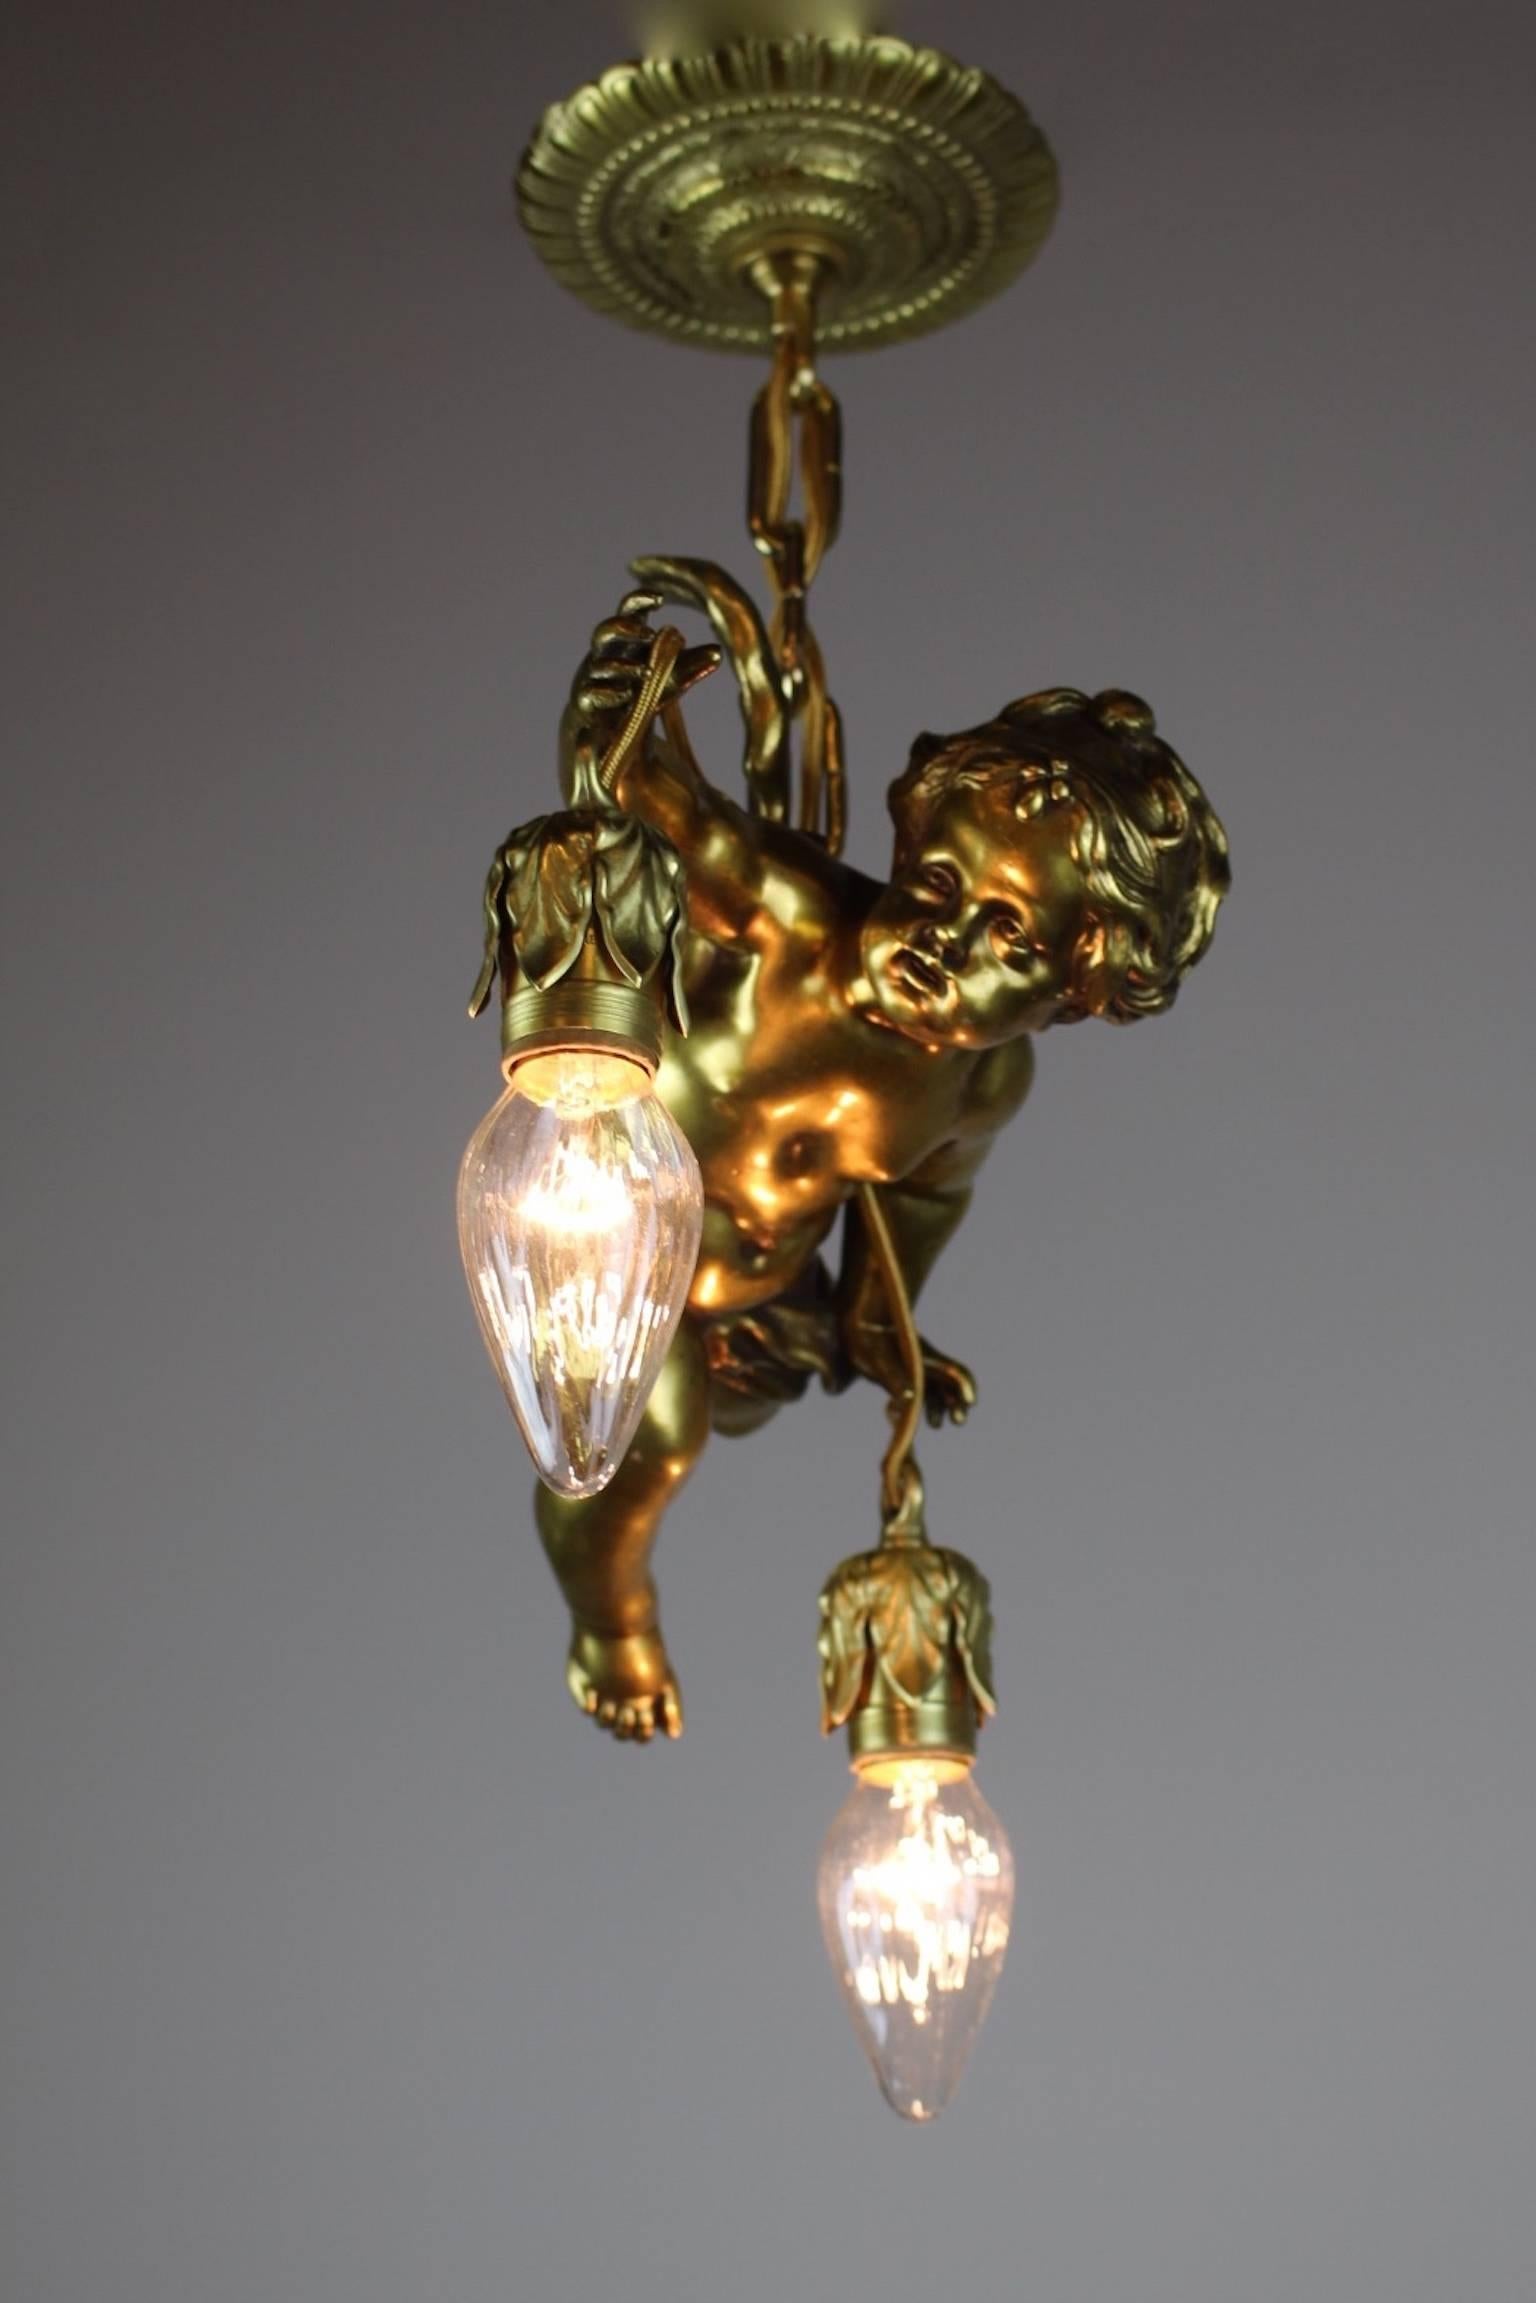 A quality fixture in the Renaissance Revival style, circa 1915. The body of a cherub flying through the air makes up this antique light, cherub holds the lights delicately in his hands.

Measurements: 22"in L x 16" in. D
 